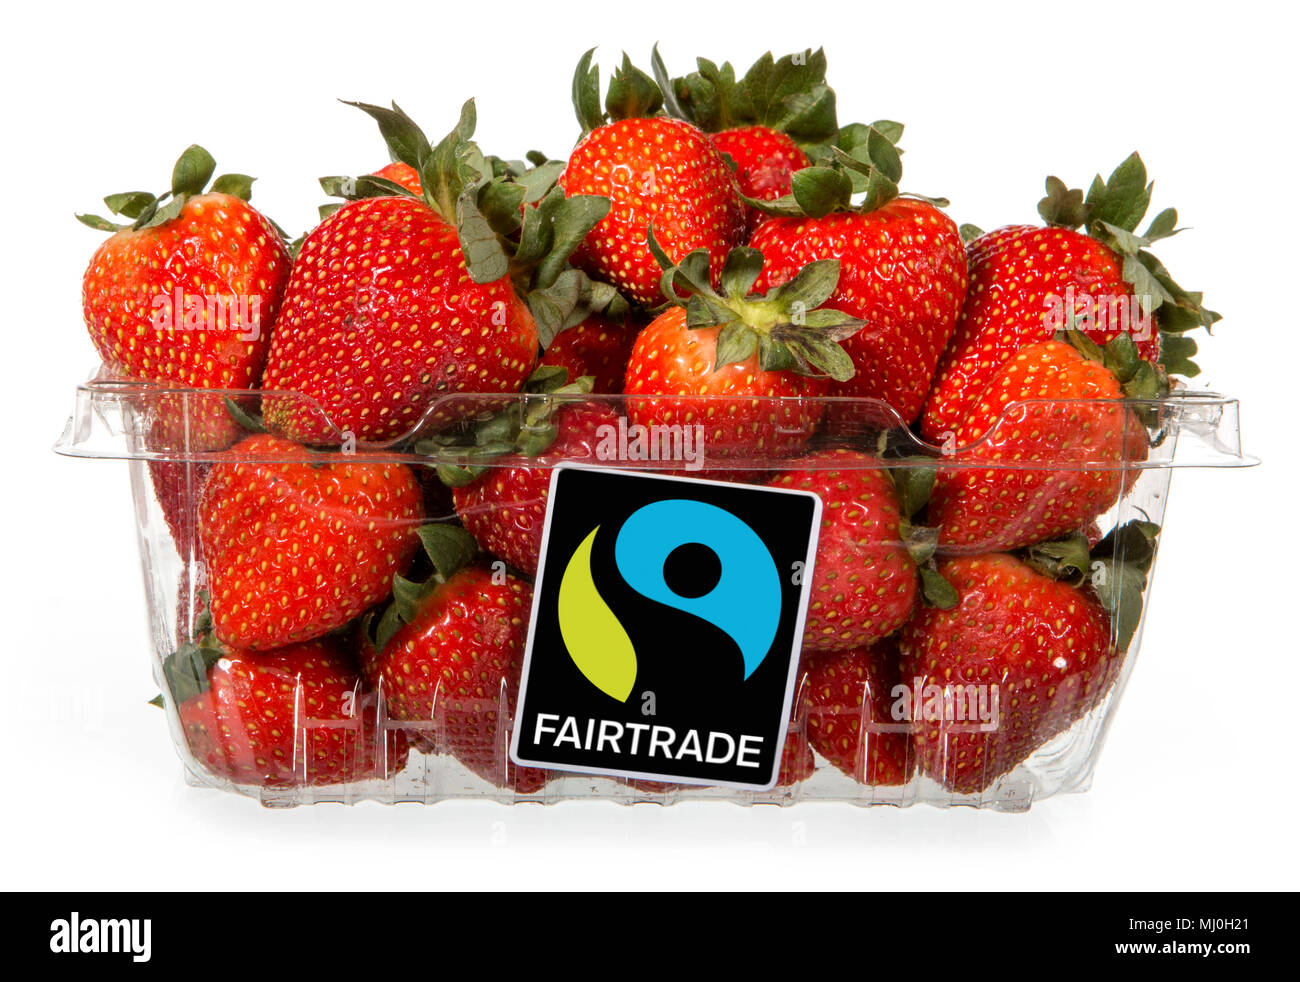 Container of strawberries featuring a 'Fairtrade' label. Stock Photo